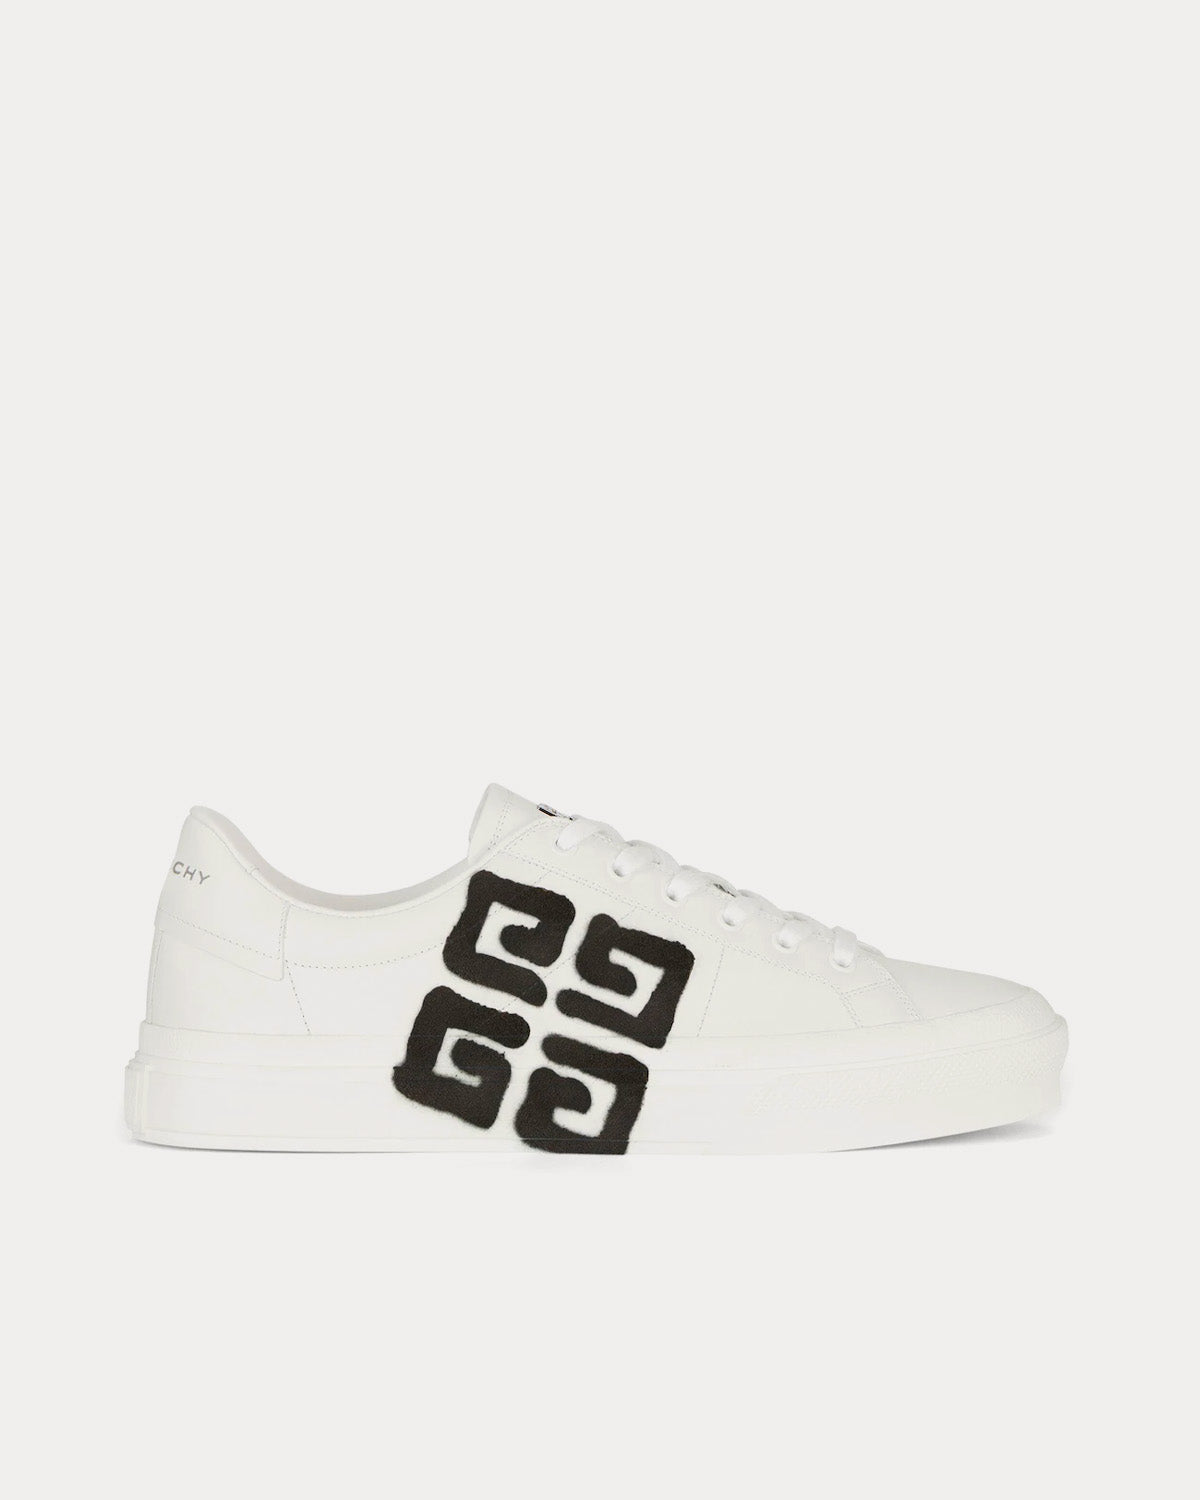 Givenchy City Sport in leather with Tag Effect 4G Print White 